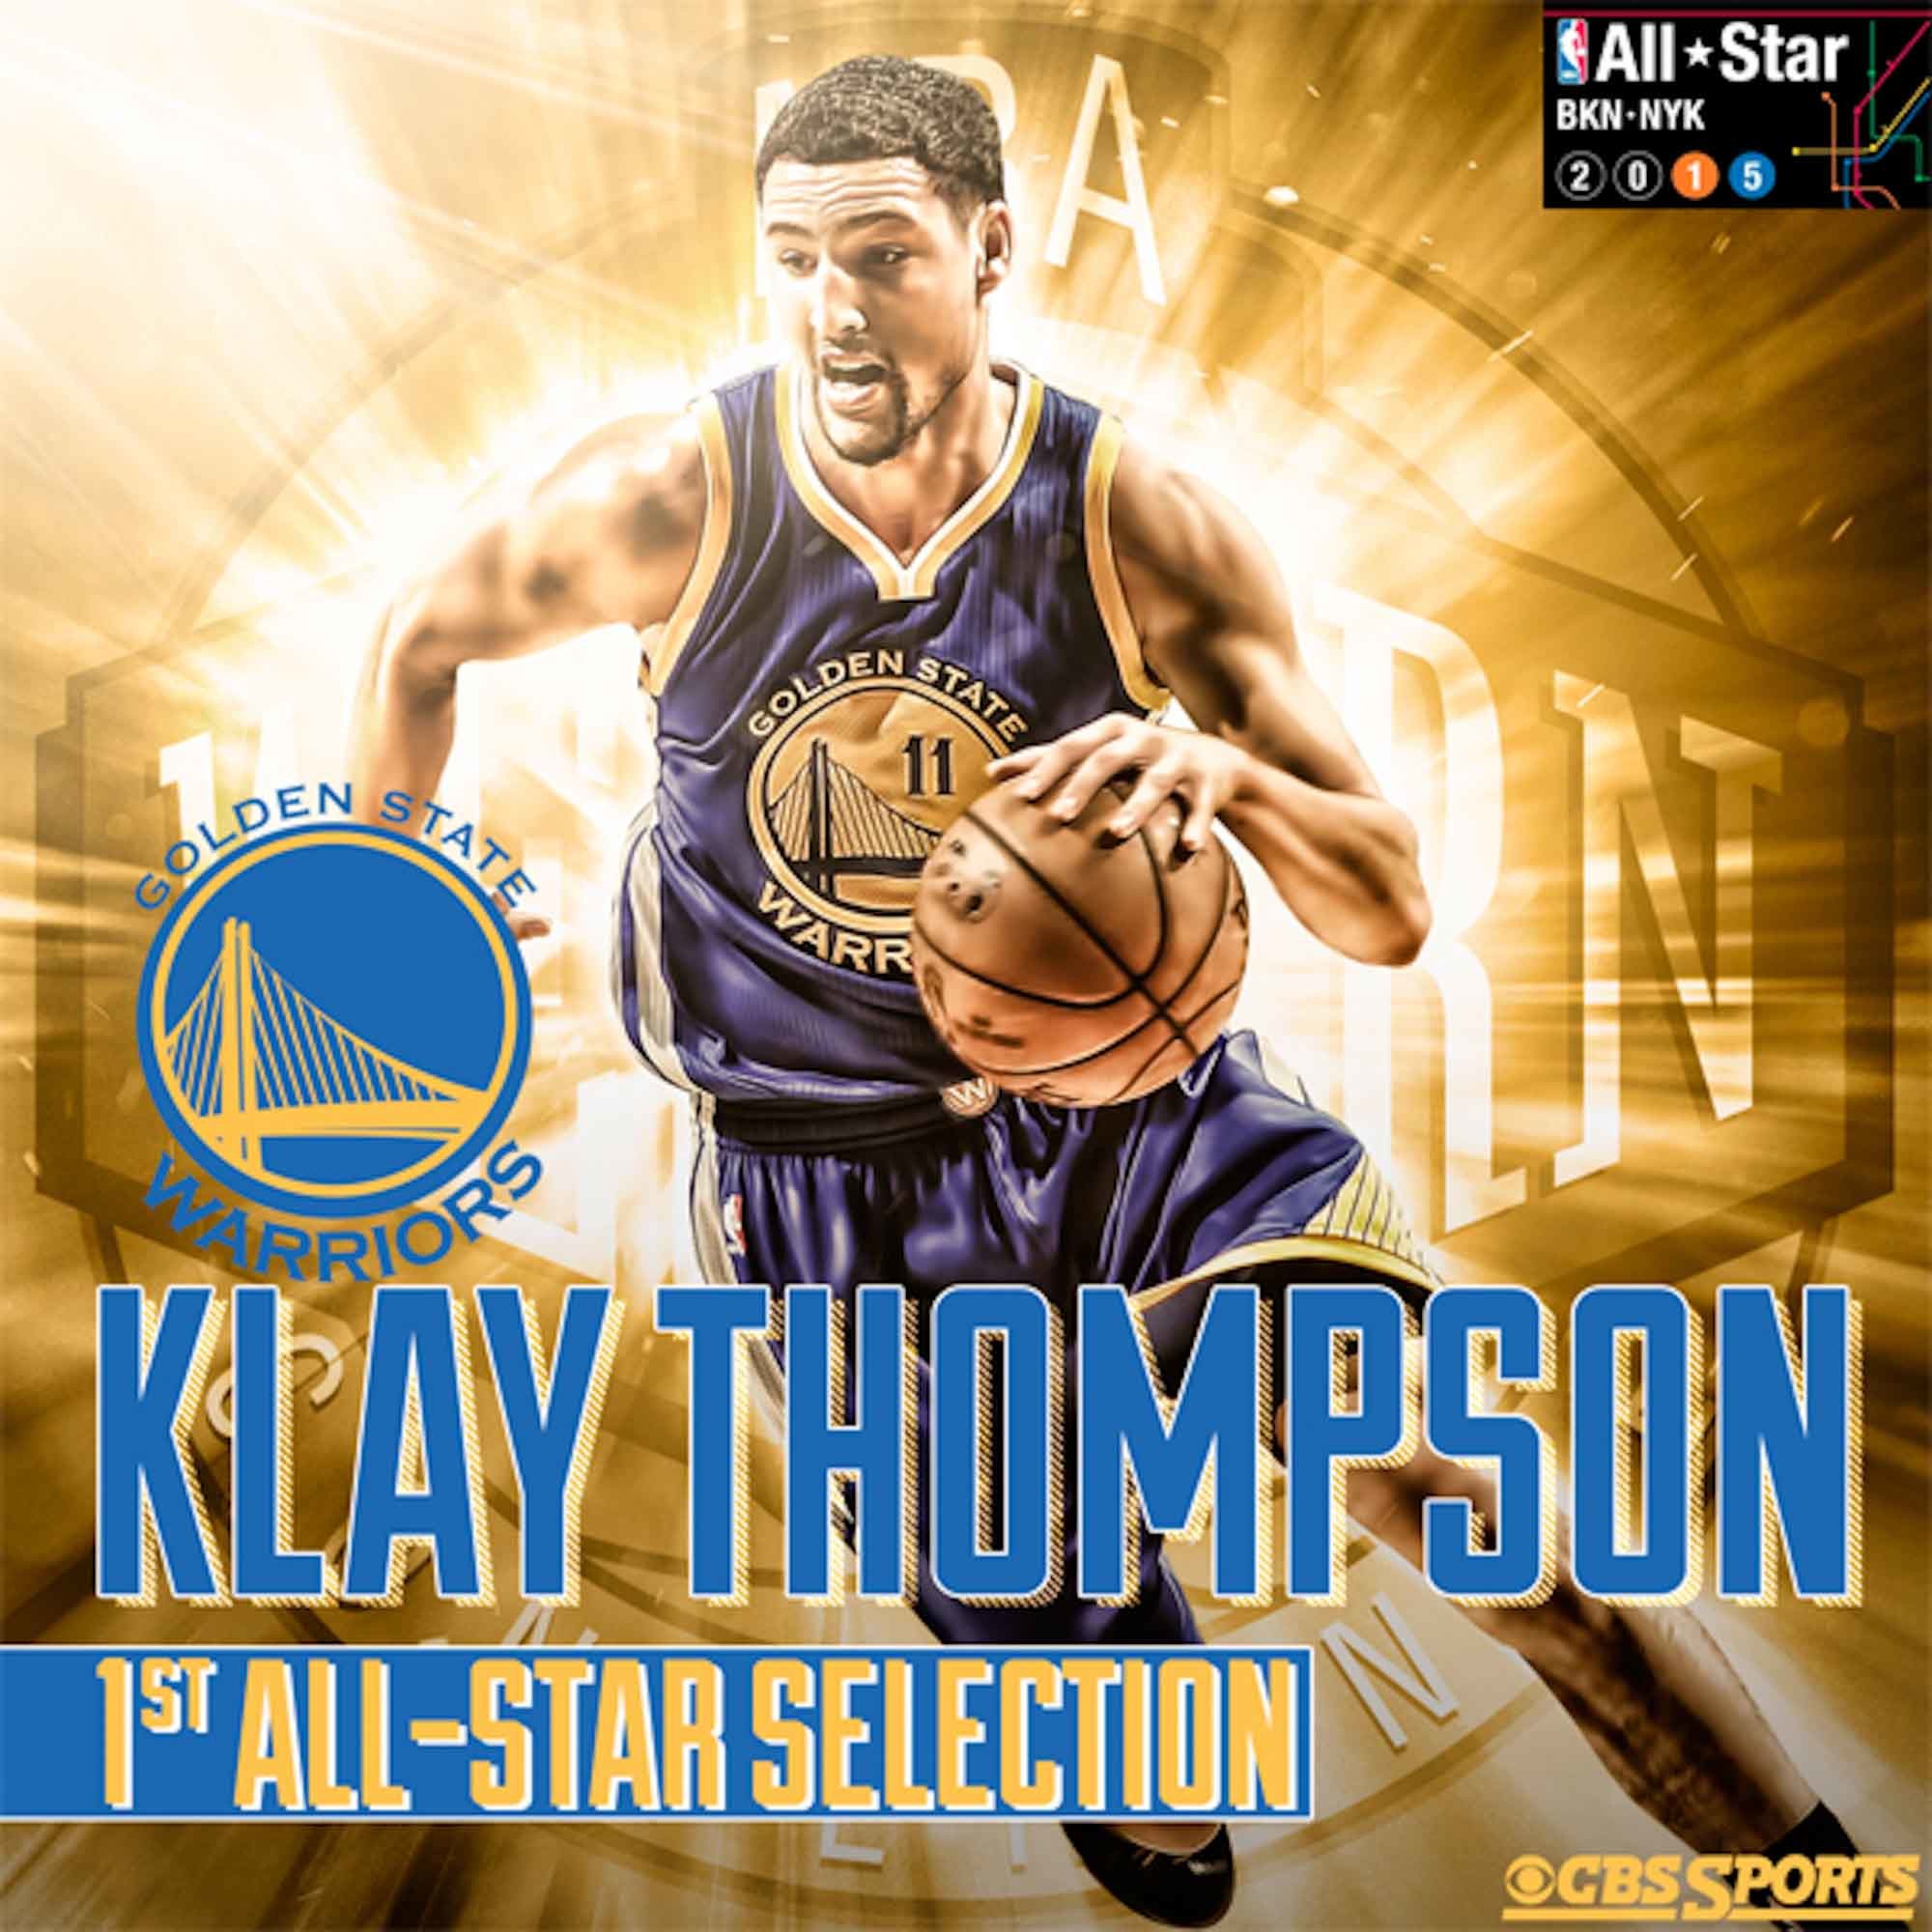 2000x2000 2016 was Klay Thompson's first year as an All Star. Photo from http:/